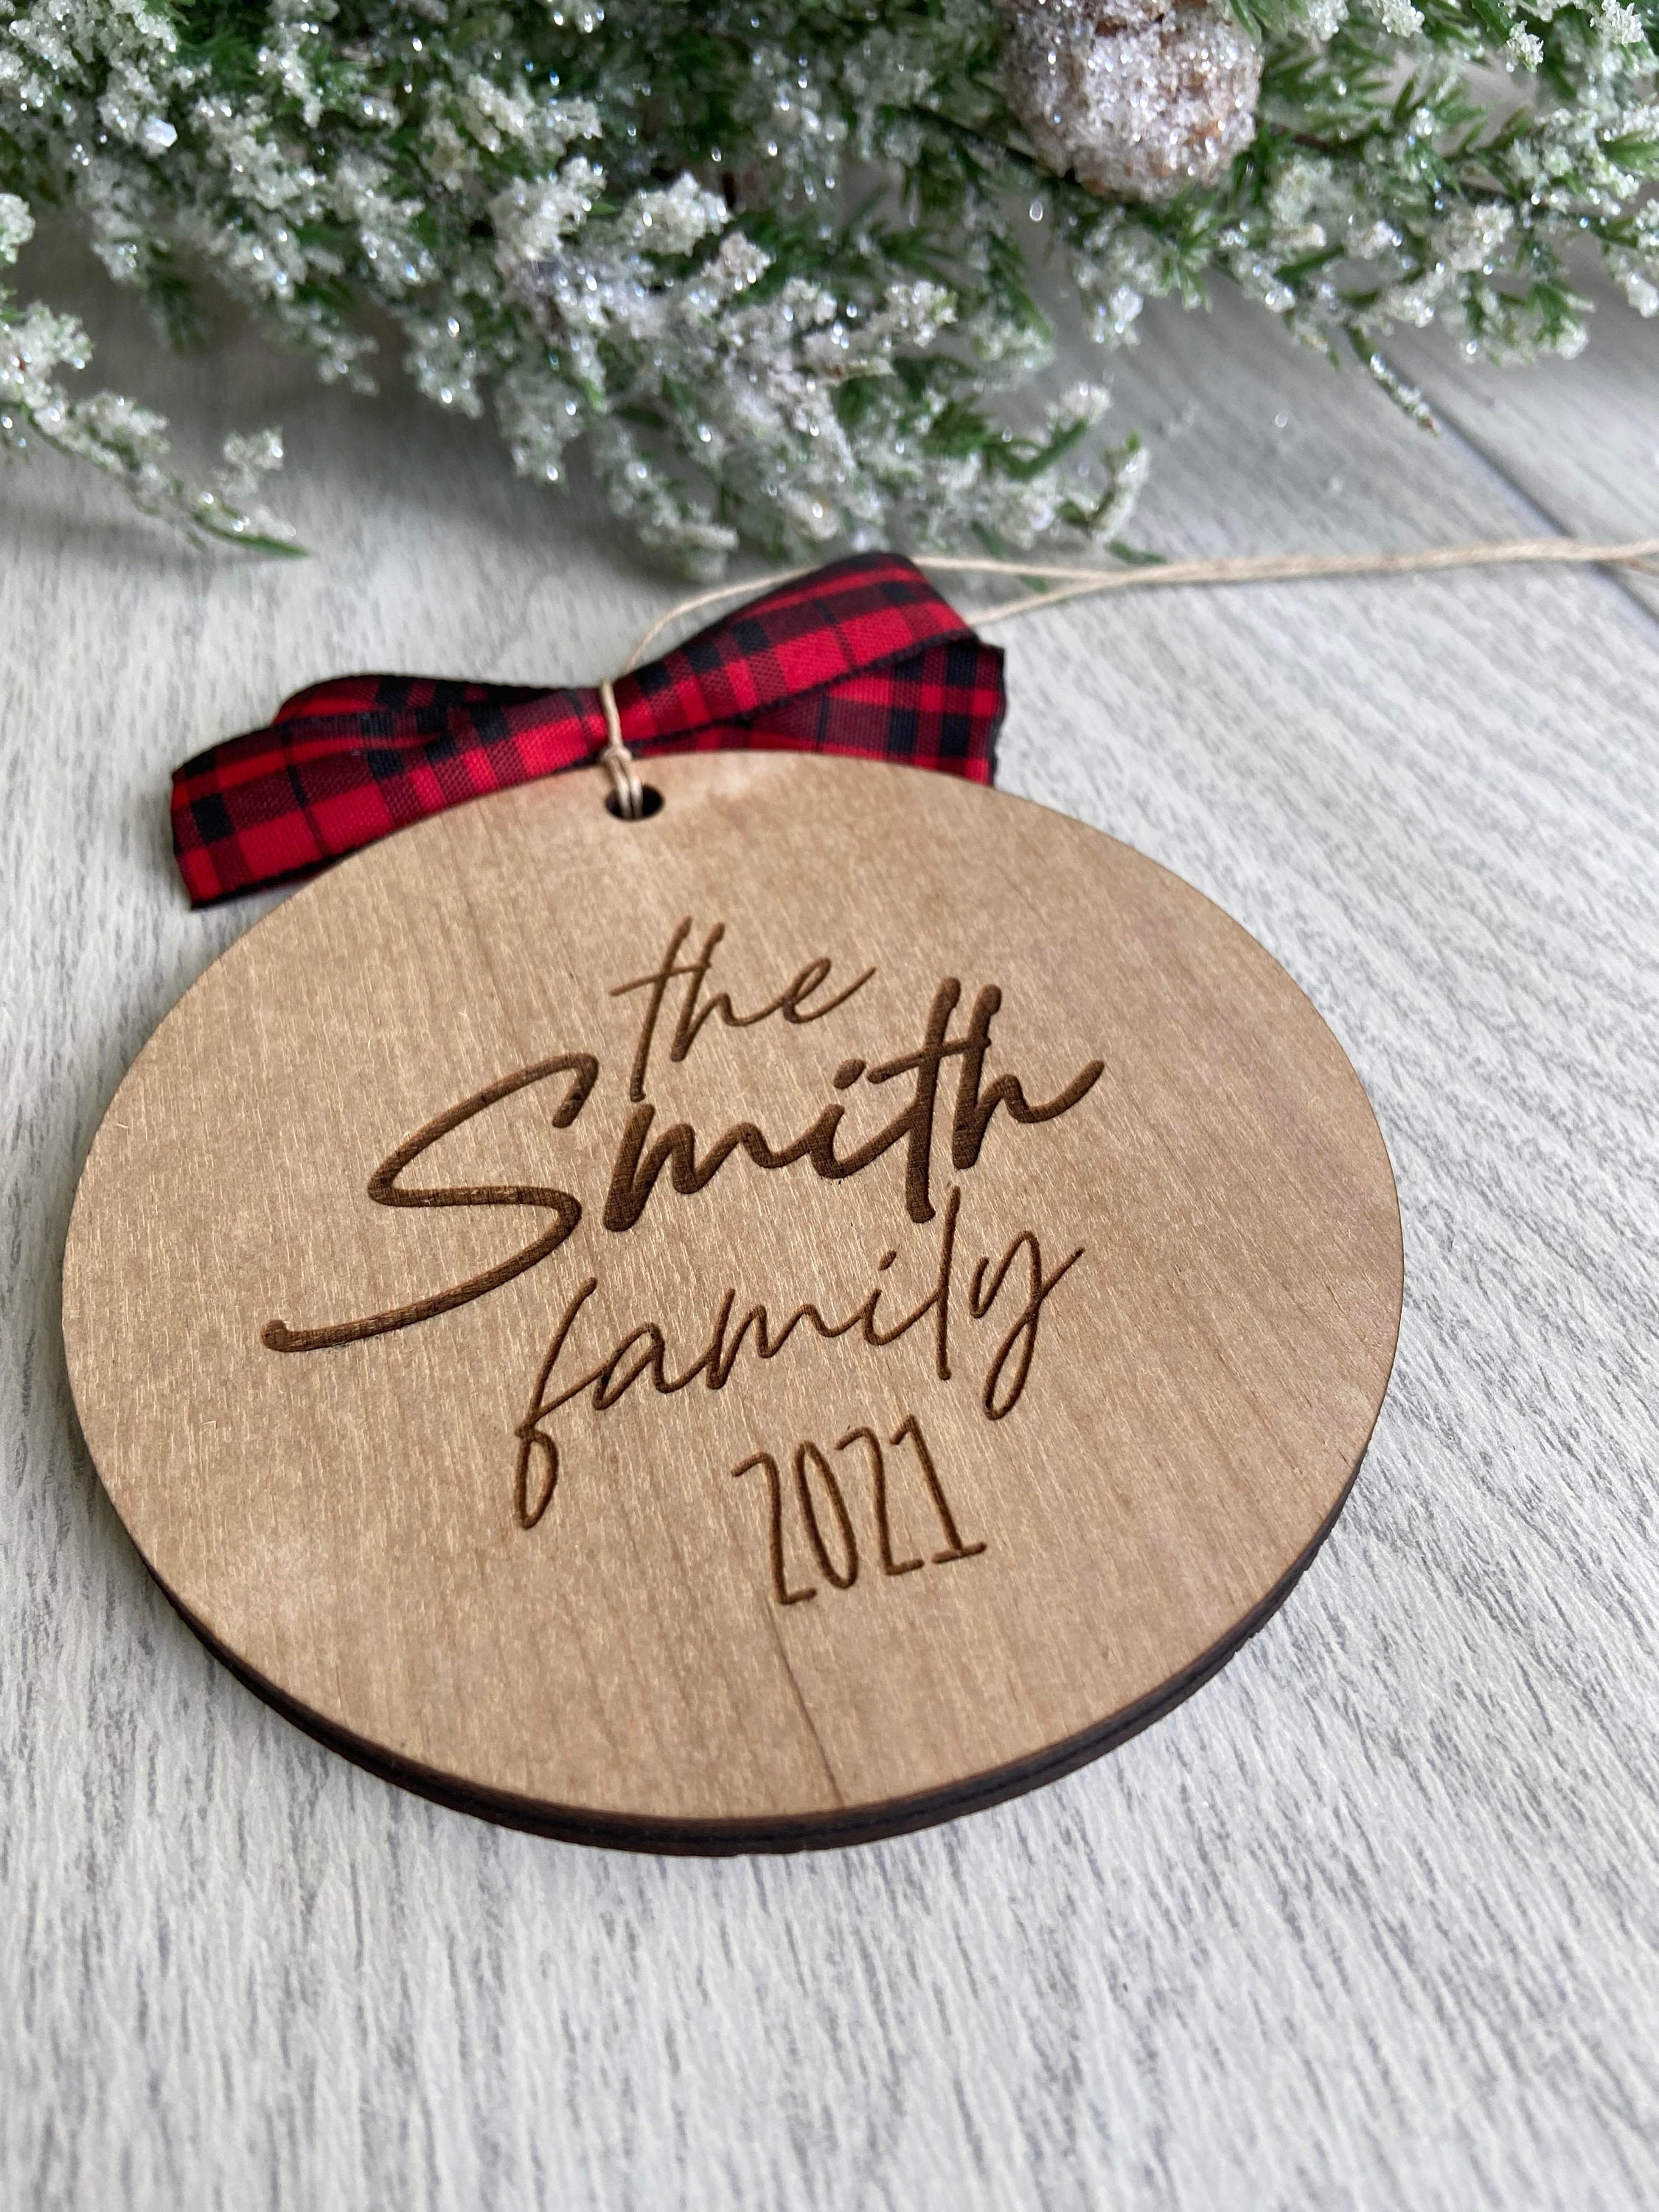 Custom Engagement Ornament 2021 Christmas Gift Present Personalized Bride to be gift Bride and Groom Bride